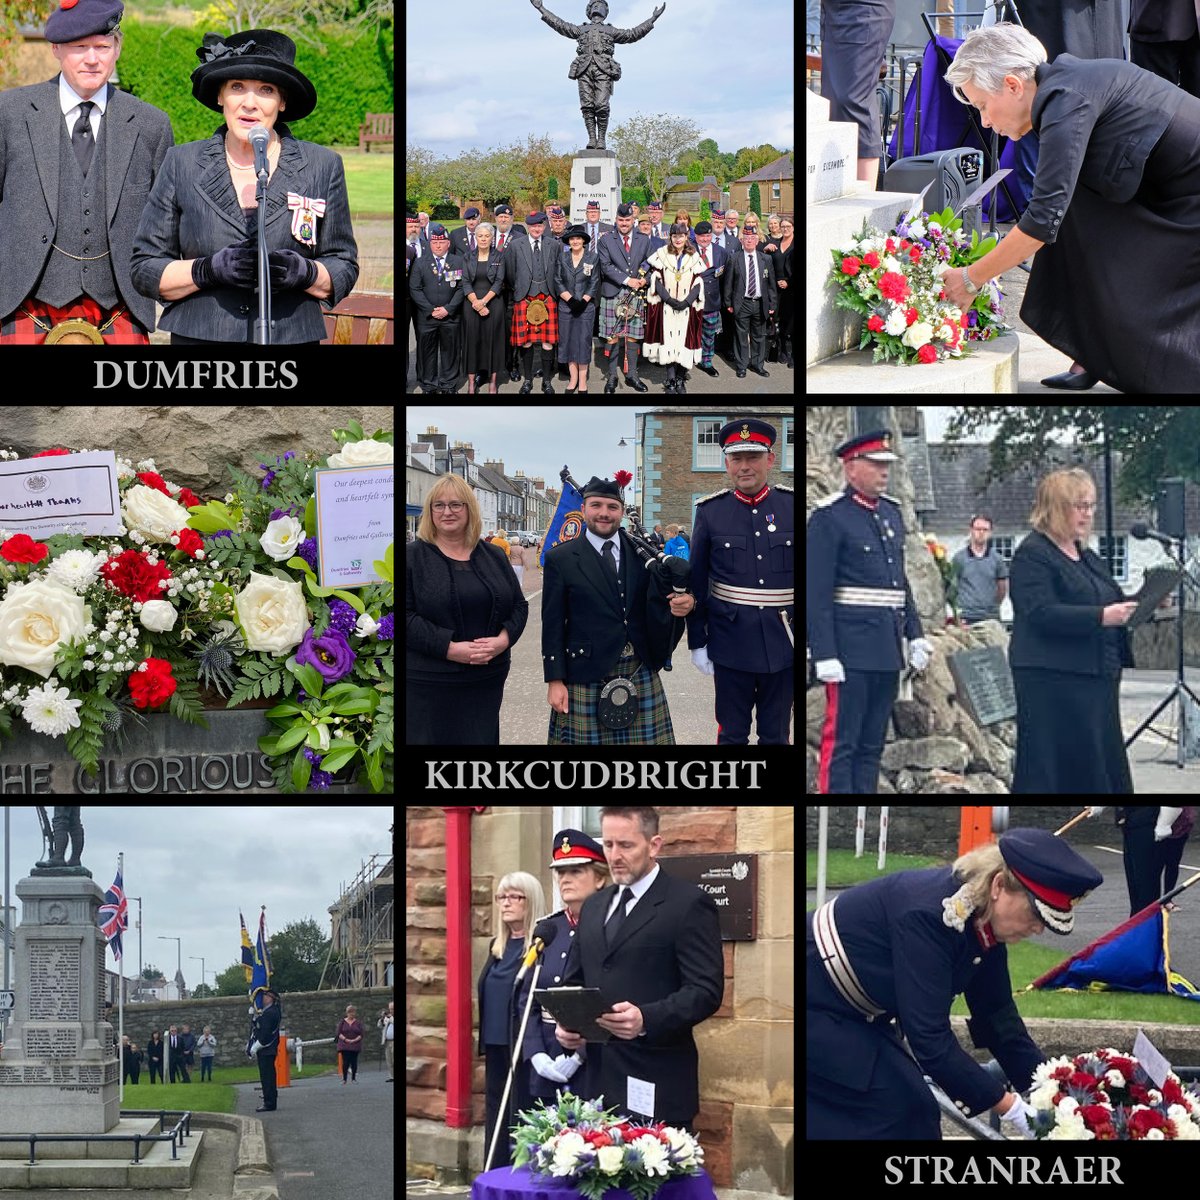 Wreaths were laid and Proclamations of The New Sovereign were made at Stranraer, Kirkcudbright and Dumfries today at 12.45pm by our Chief Executive, Convener and Deputy Convener, with the participation of the three Lord-Lieutenants from across Dumfries and Galloway.